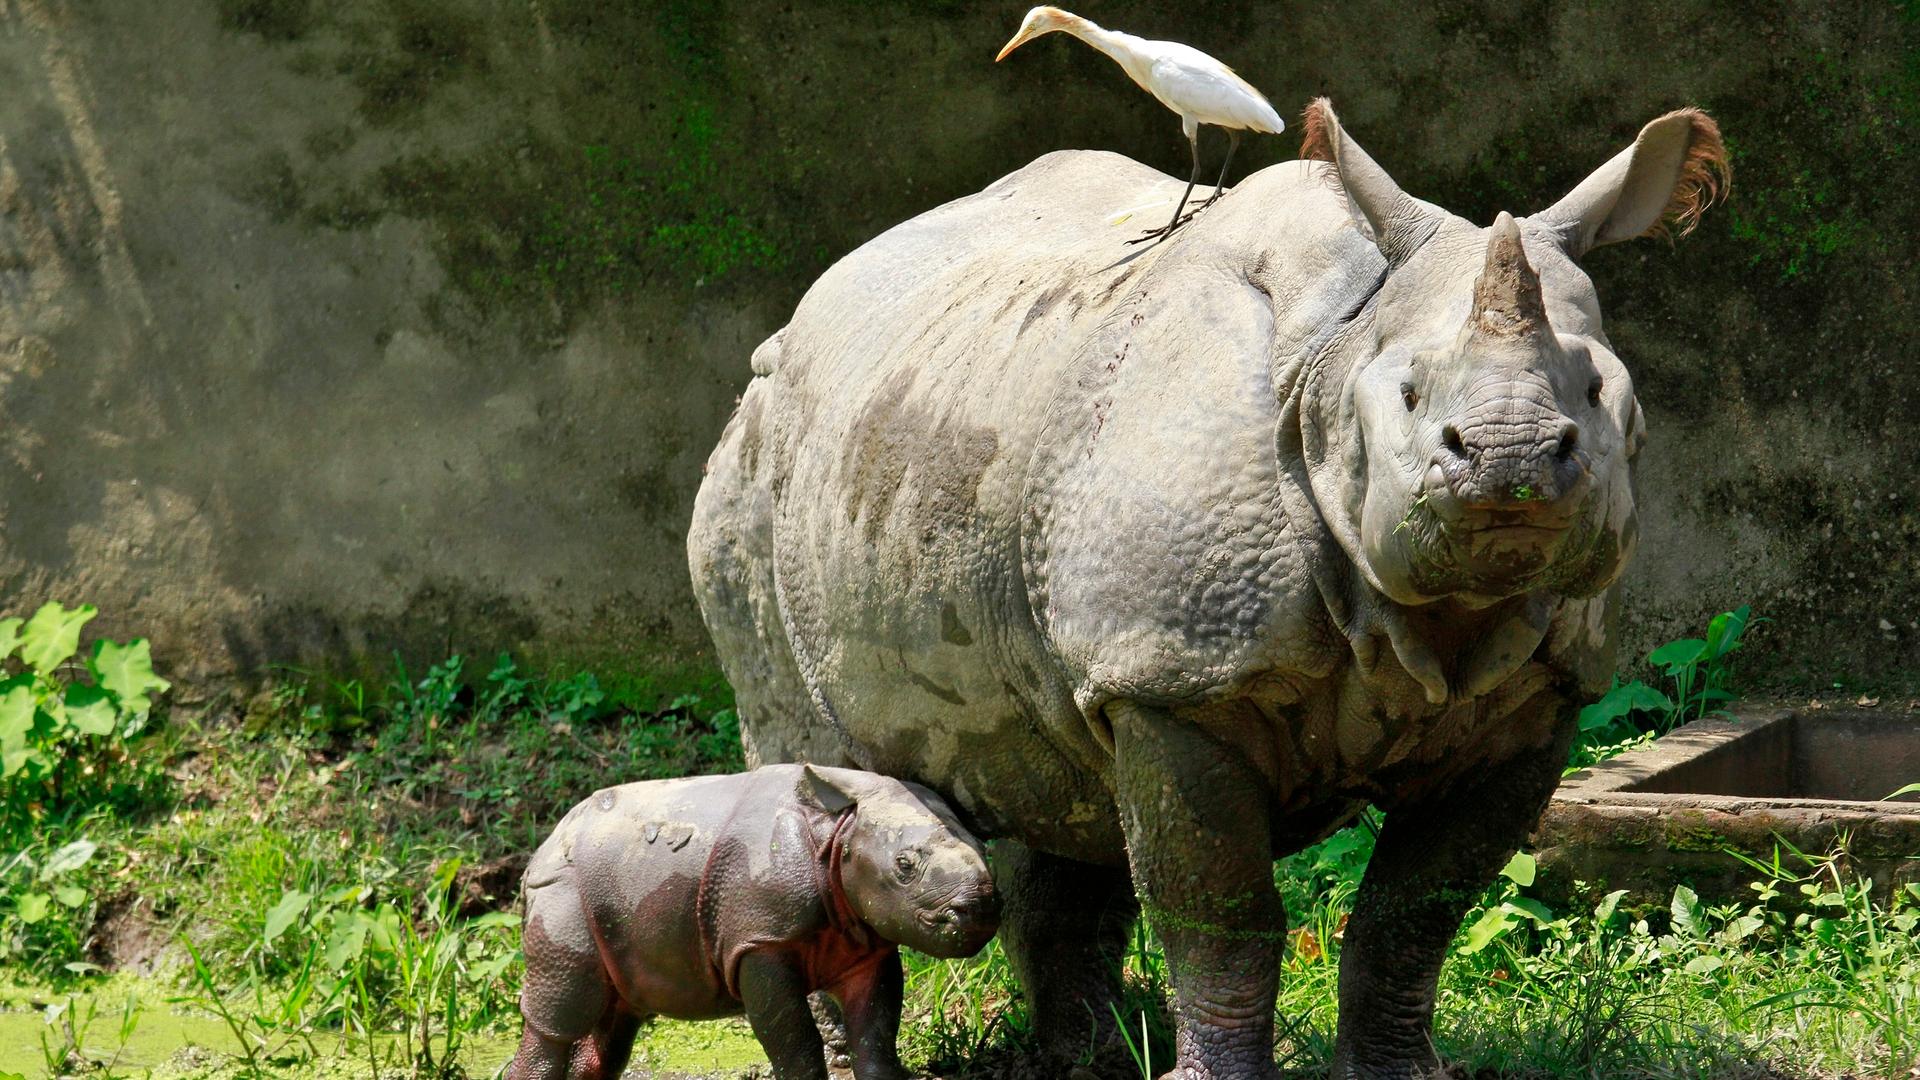 A one-horned rhino named Baghekhaity stands next to its 10-day-old calf at a zoo in Guwahati, in the northeastern Indian state of Assam.